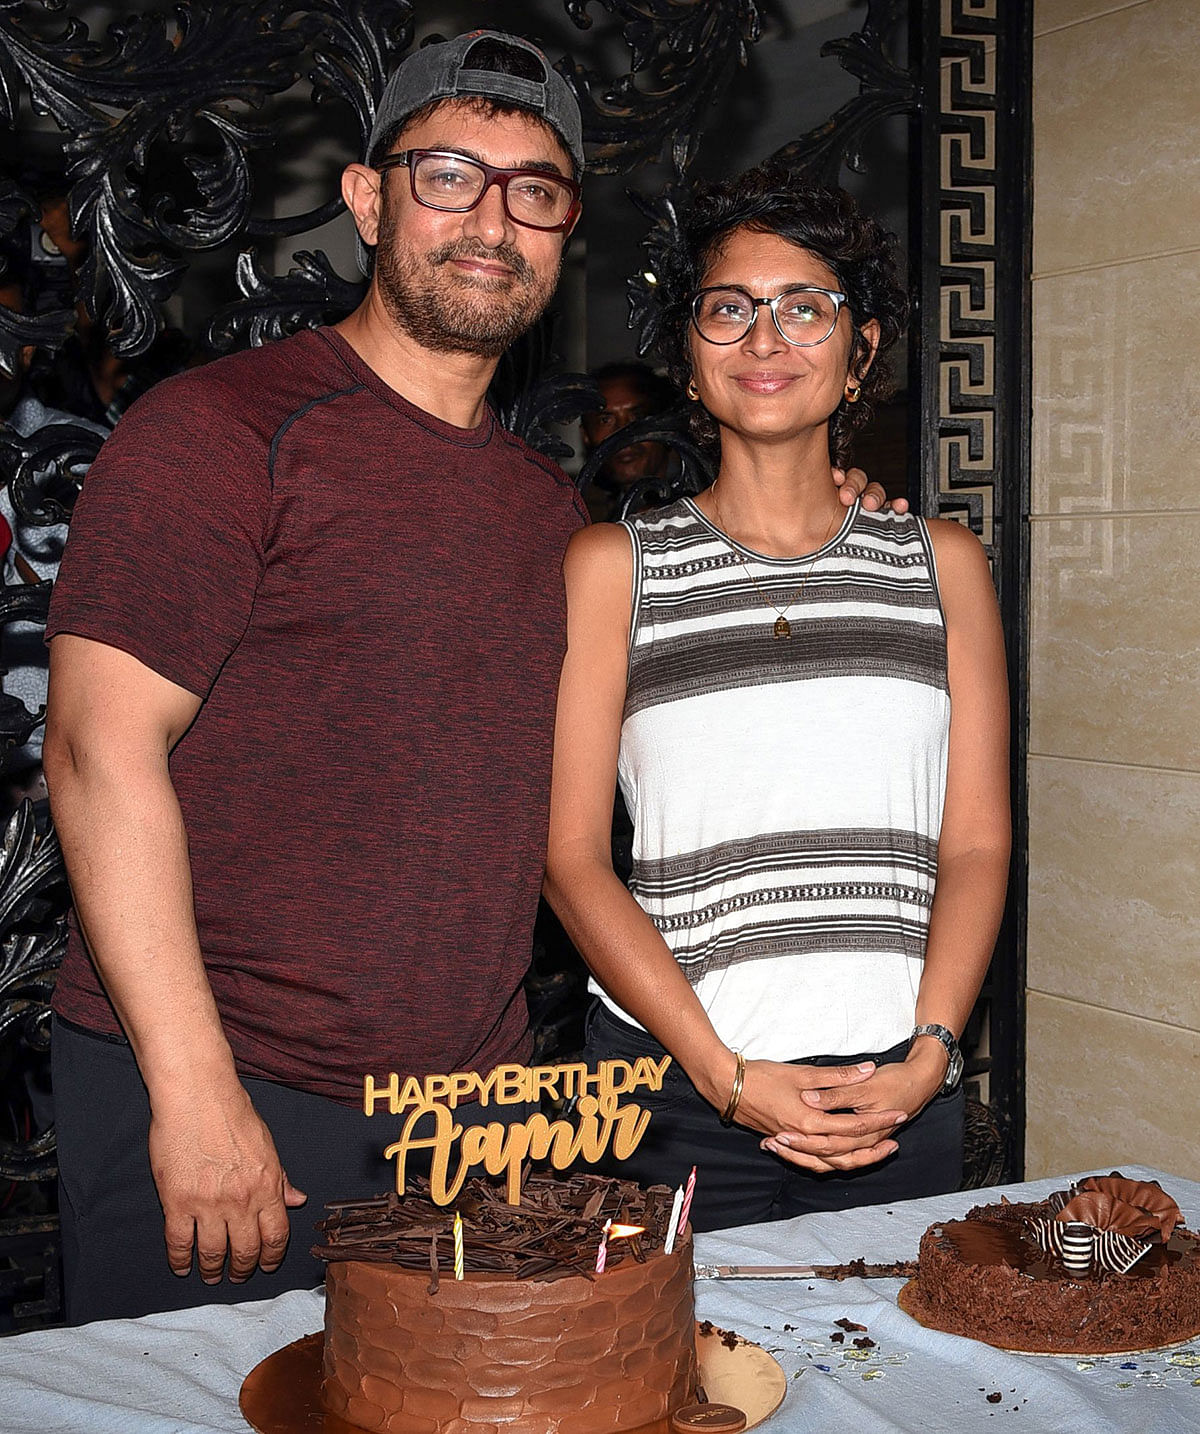 Indian Bollywood actor and producer Aamir Khan (L) along with his wife, film director and screenwriter Kiran Rao Khan (R), pose for photographs on his 54th birthday at his residence in Mumbai on 14 March, 2019. Photo: AFP